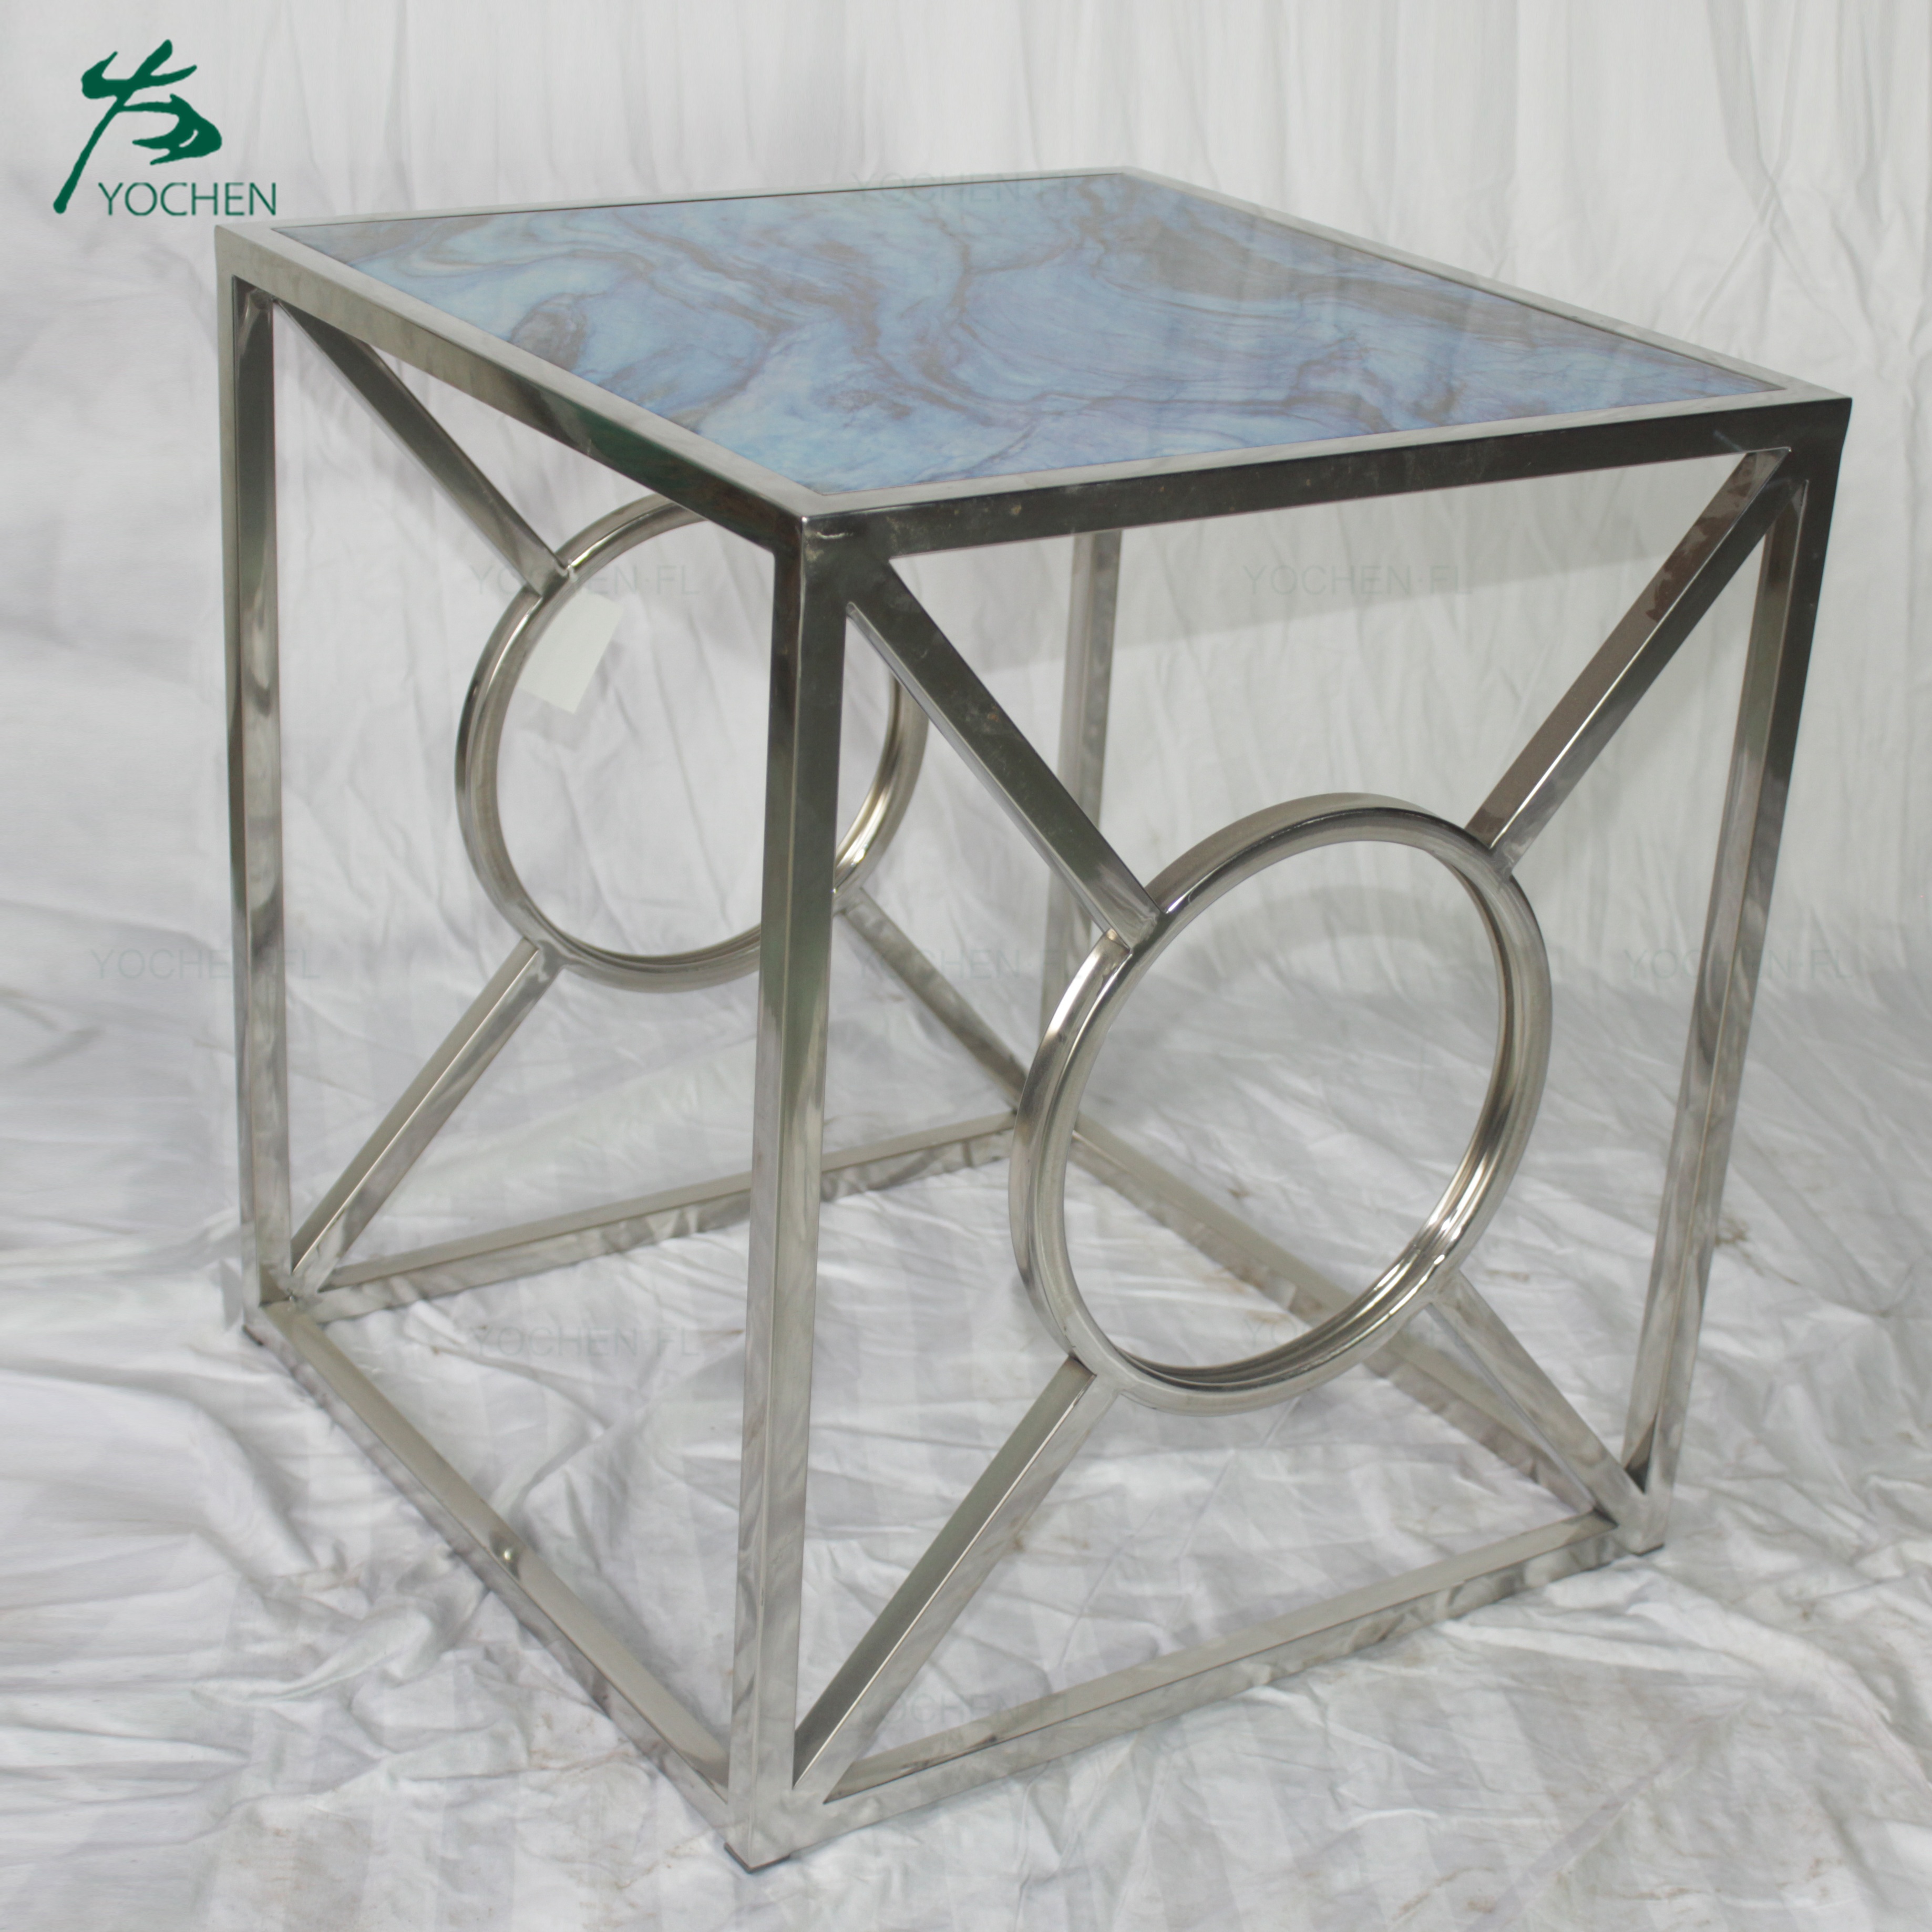 luxury living room coffee table shining color Chinese designer coffee table